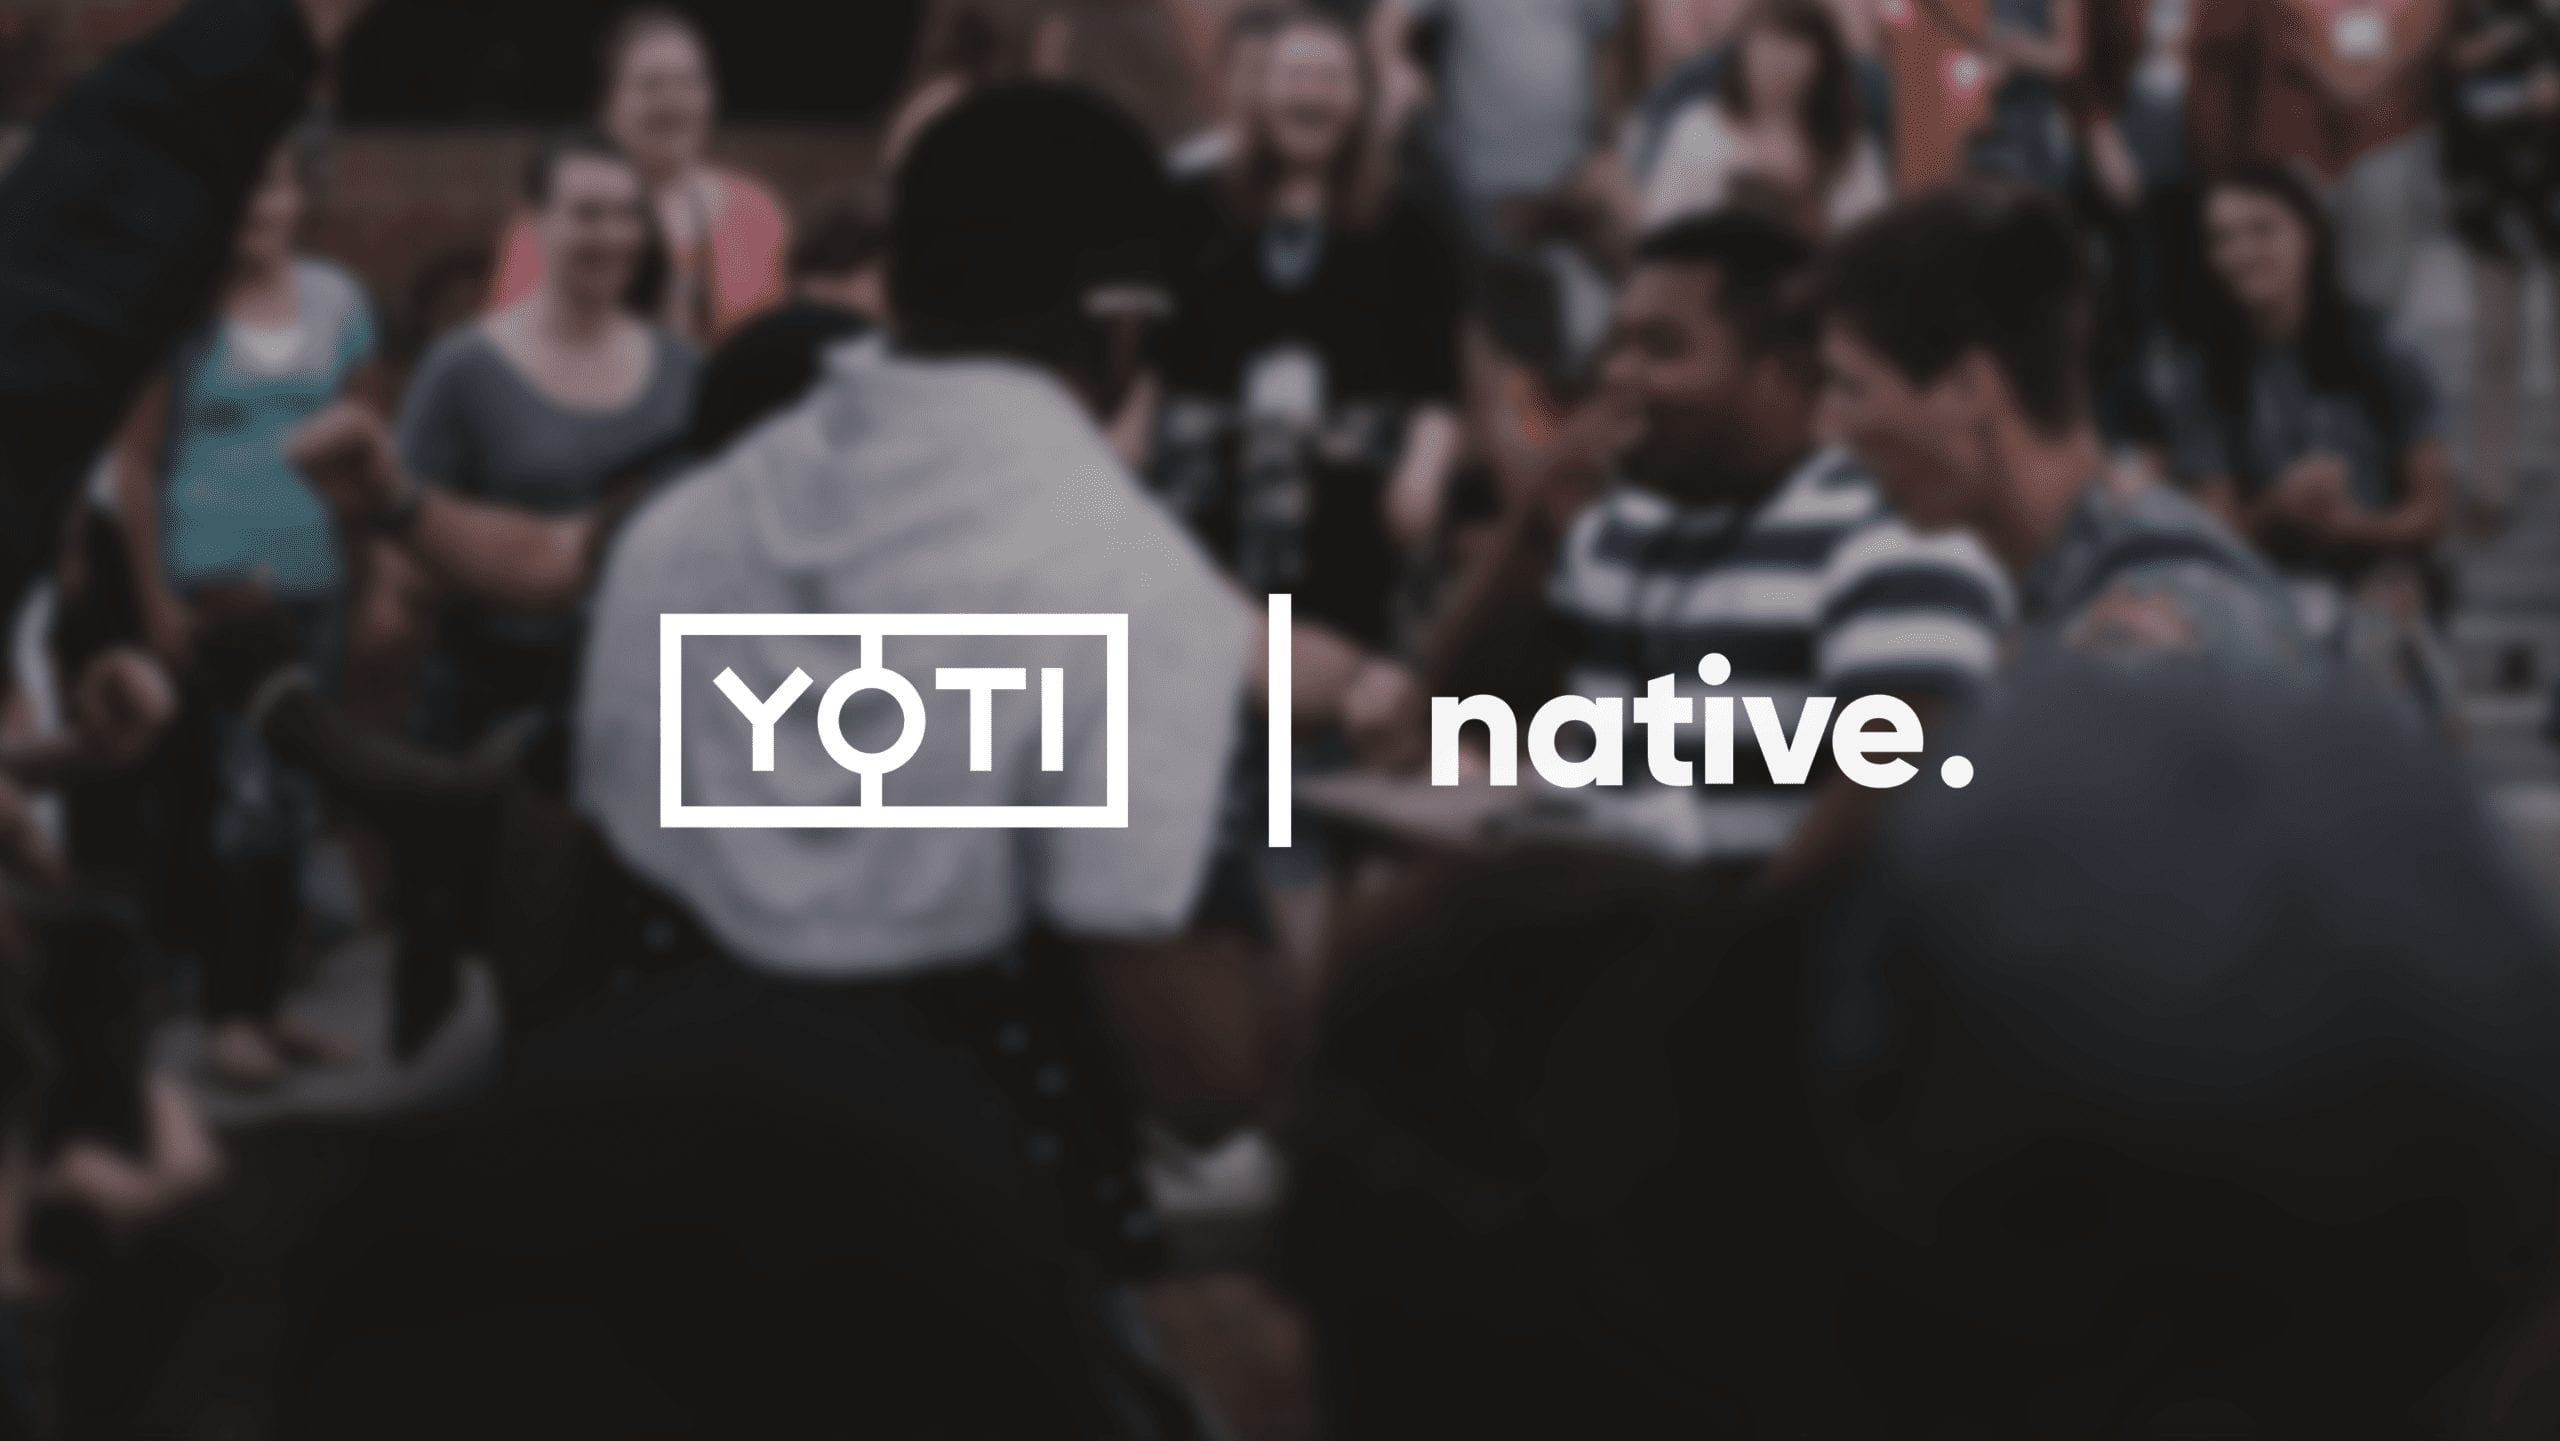 Yoti is partnering with native to enhance student experiences